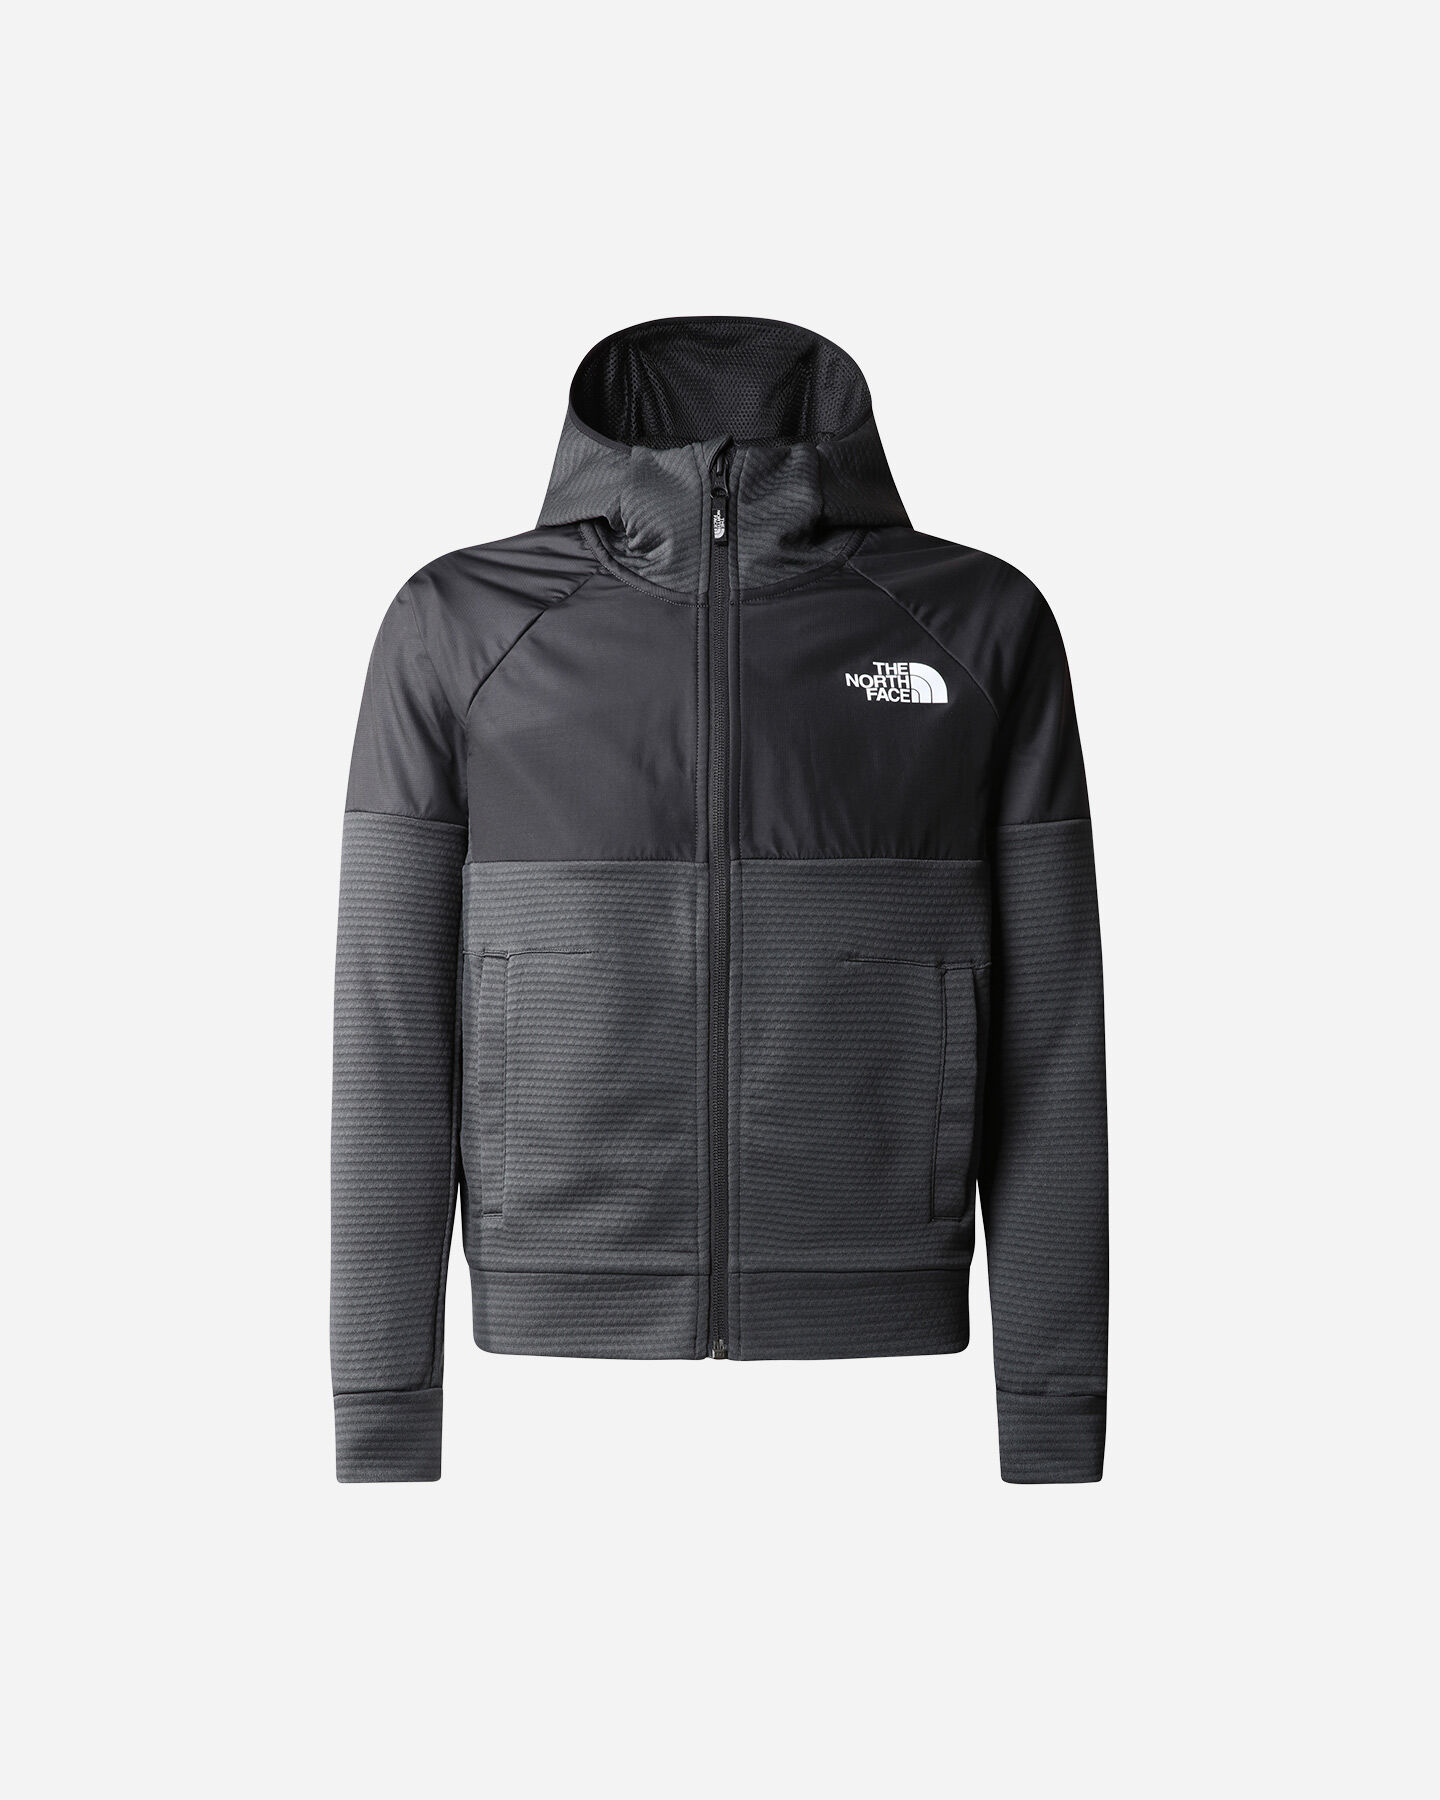  Pile THE NORTH FACE MOUNTAIN ATHLETICS JR S5537320|0C5|XS scatto 0